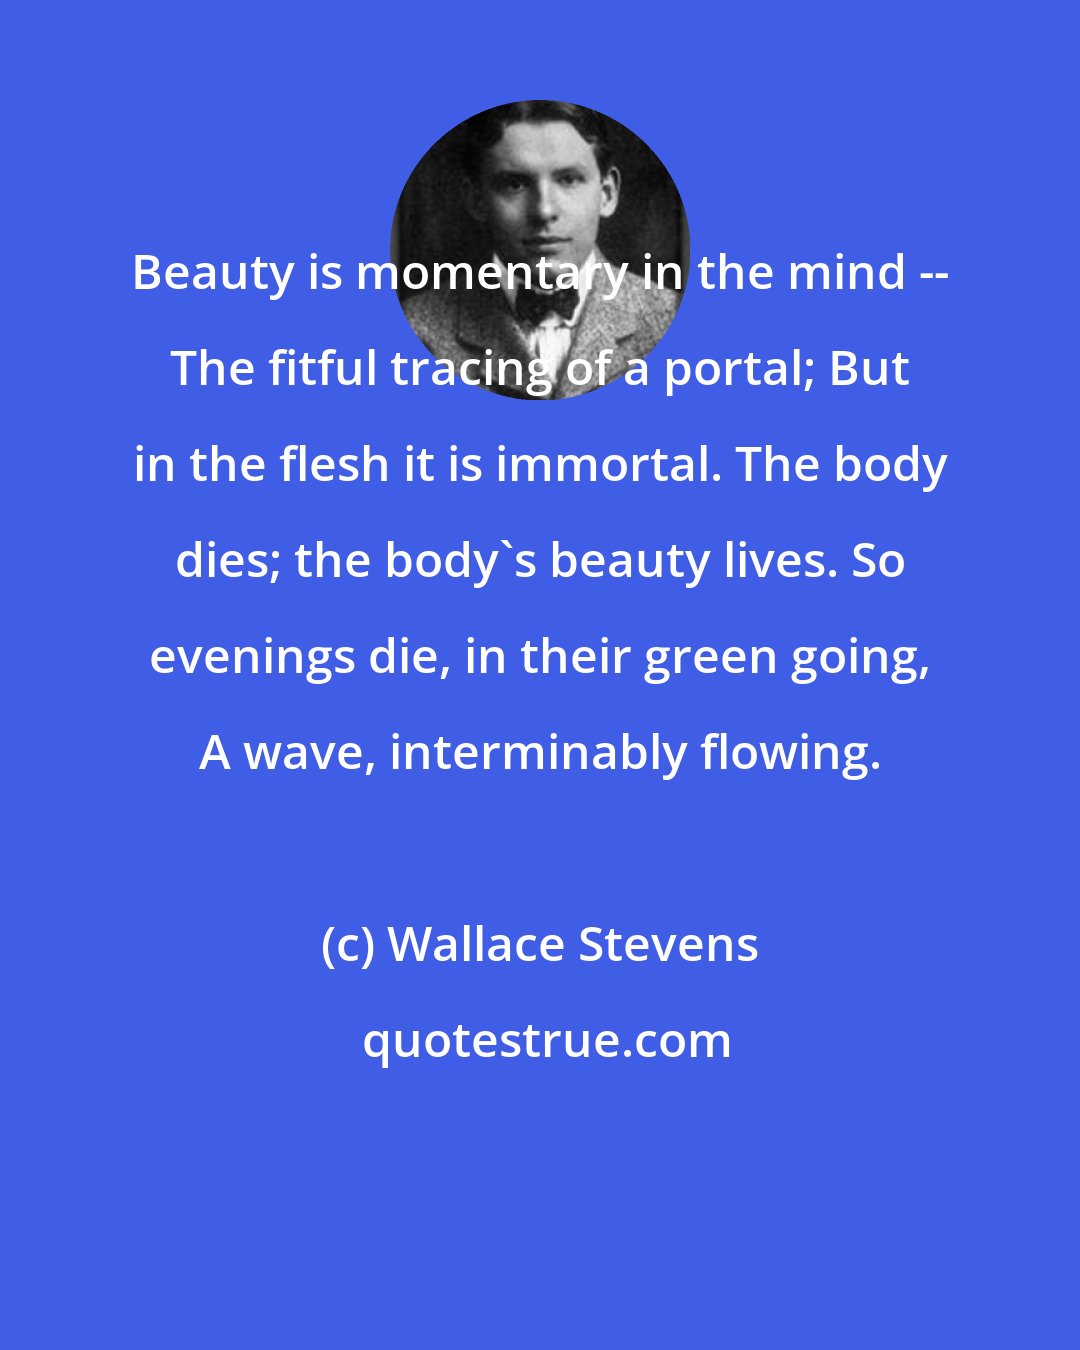 Wallace Stevens: Beauty is momentary in the mind -- The fitful tracing of a portal; But in the flesh it is immortal. The body dies; the body's beauty lives. So evenings die, in their green going, A wave, interminably flowing.